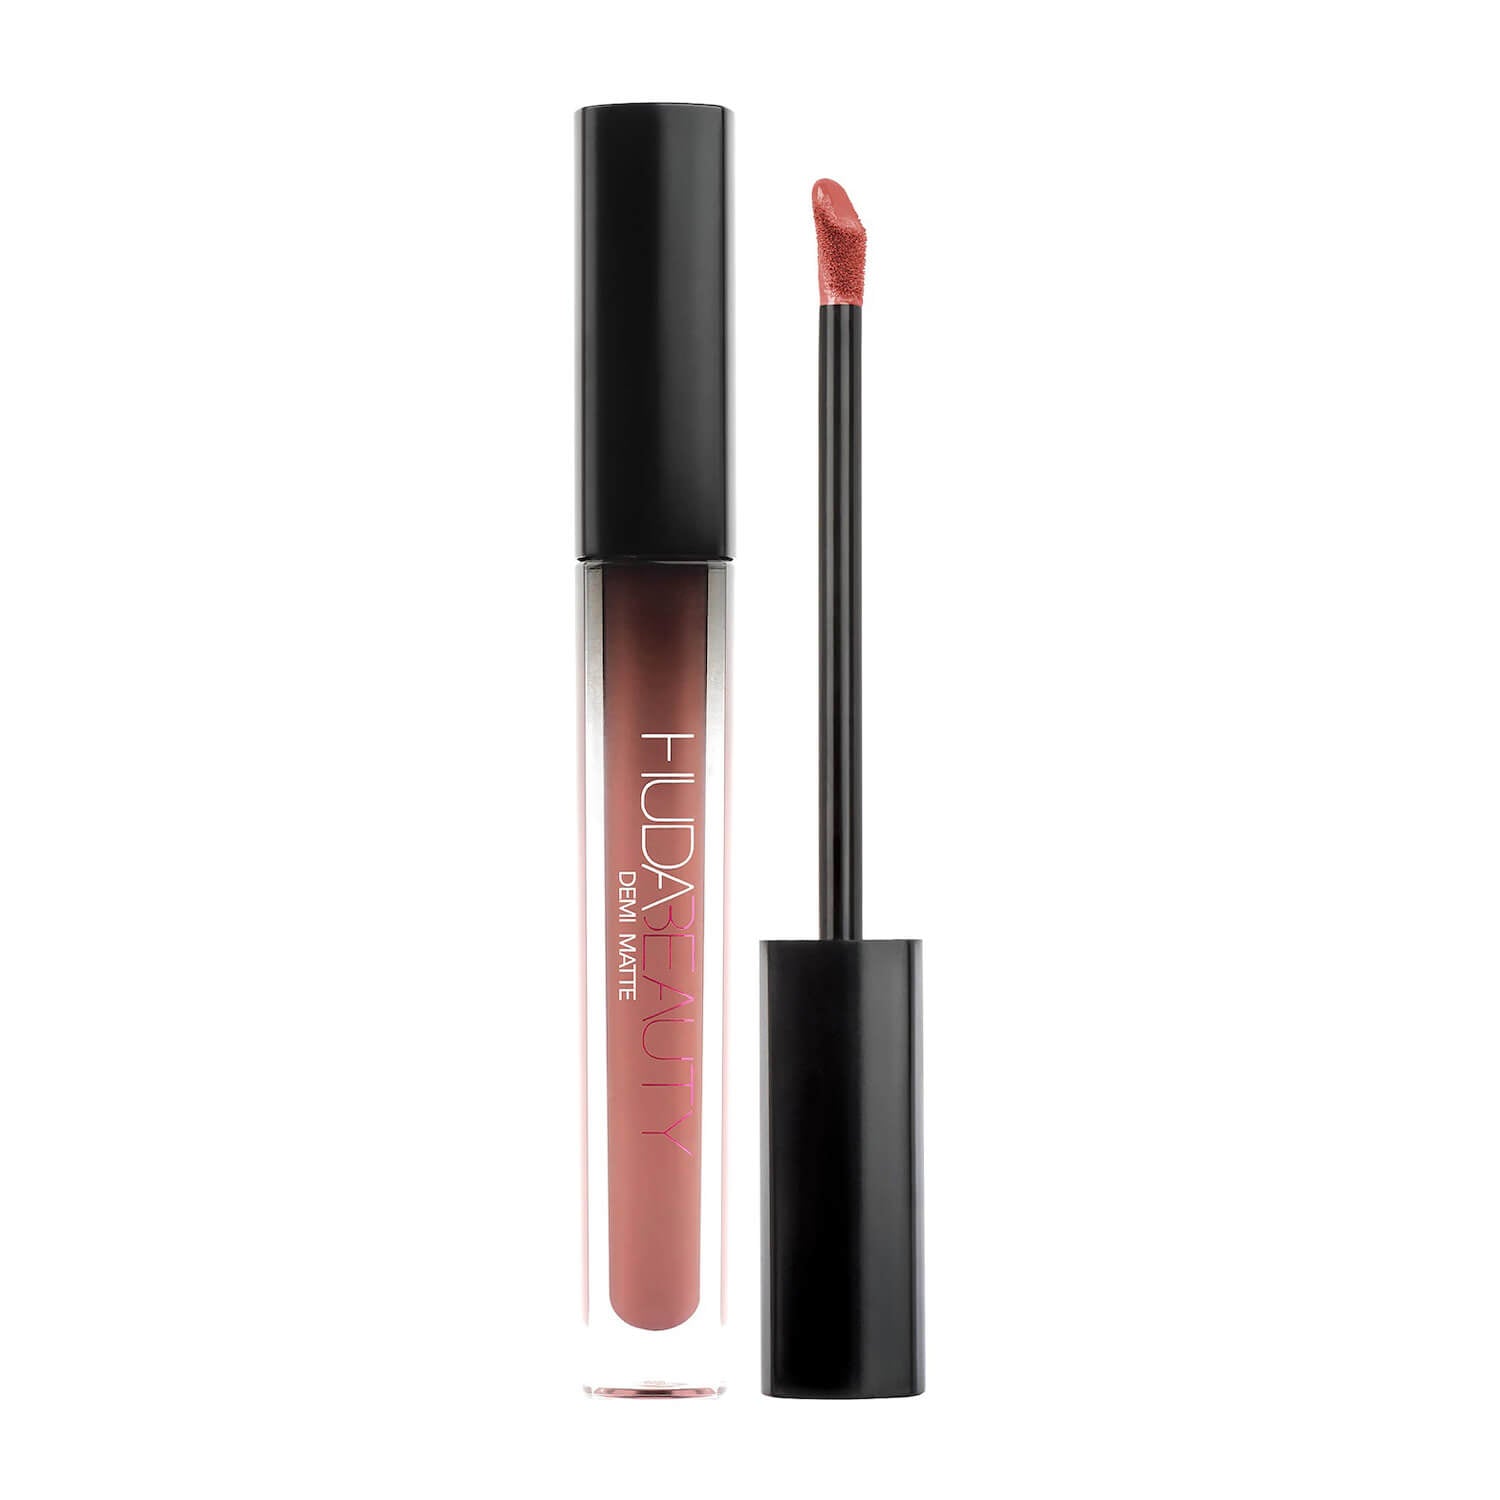 Huda Beauty Demi Matte Cream Liquid Lipstick available at Heygirl.pk for delivery in Karachi, Lahore, Islamabad across Pakistan.